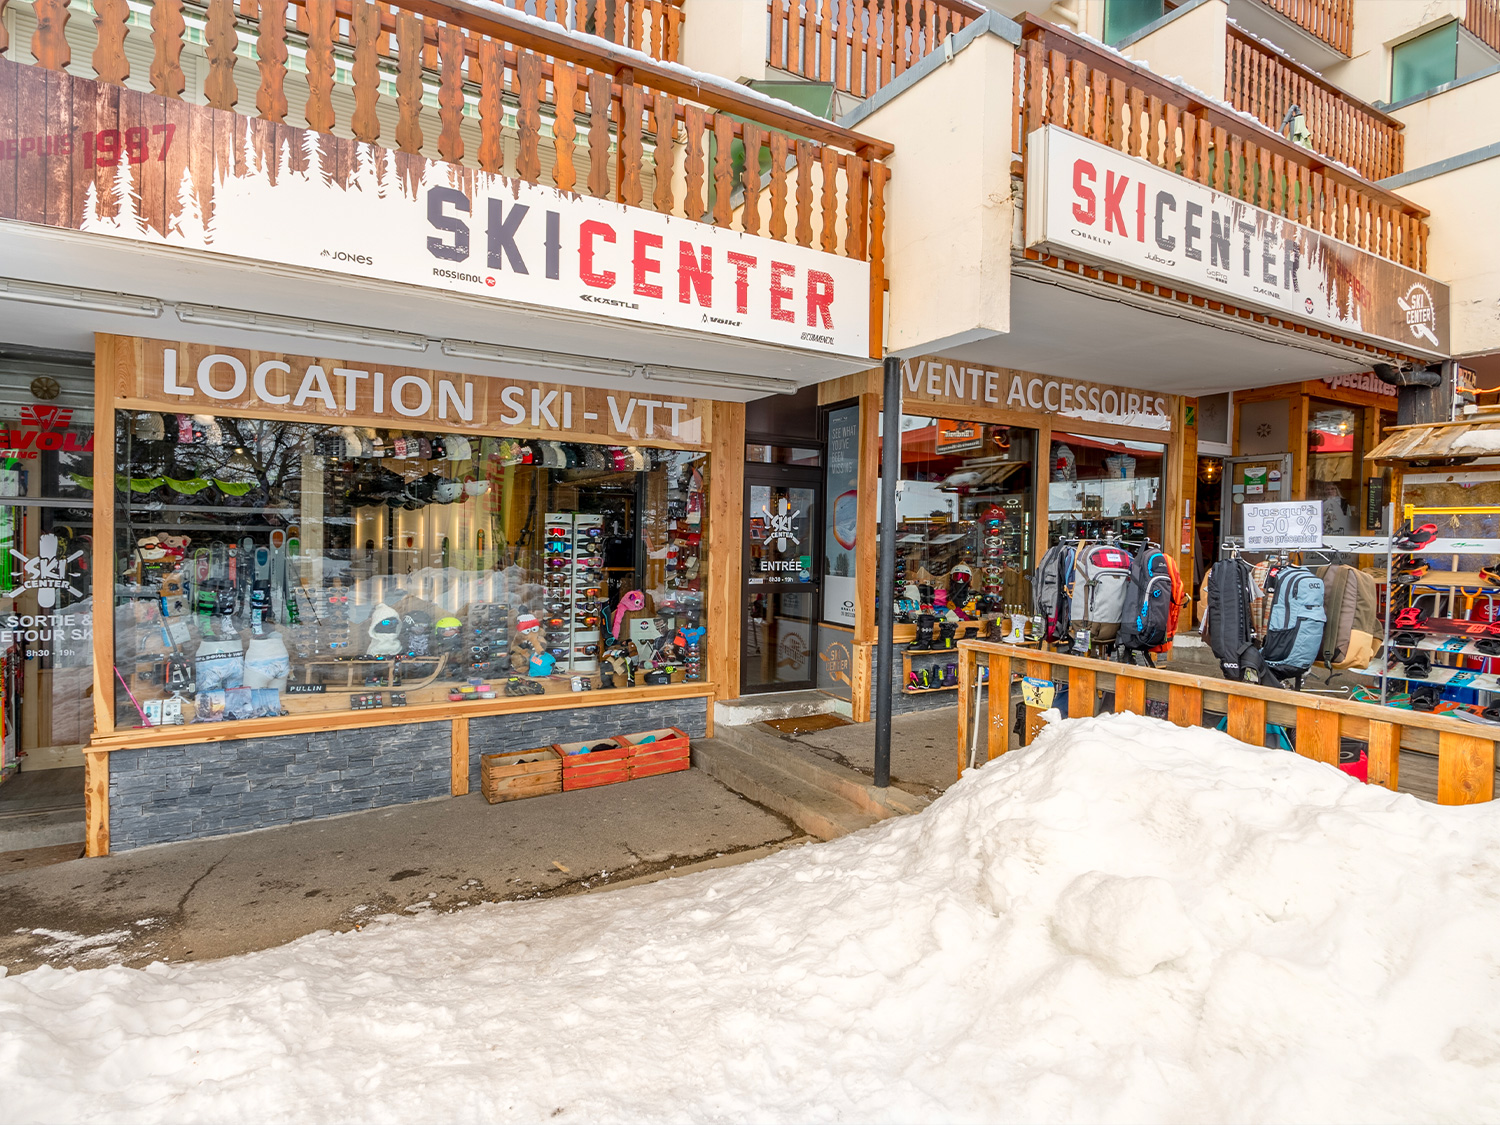 10 Years for the Ski Center 3.0 Store